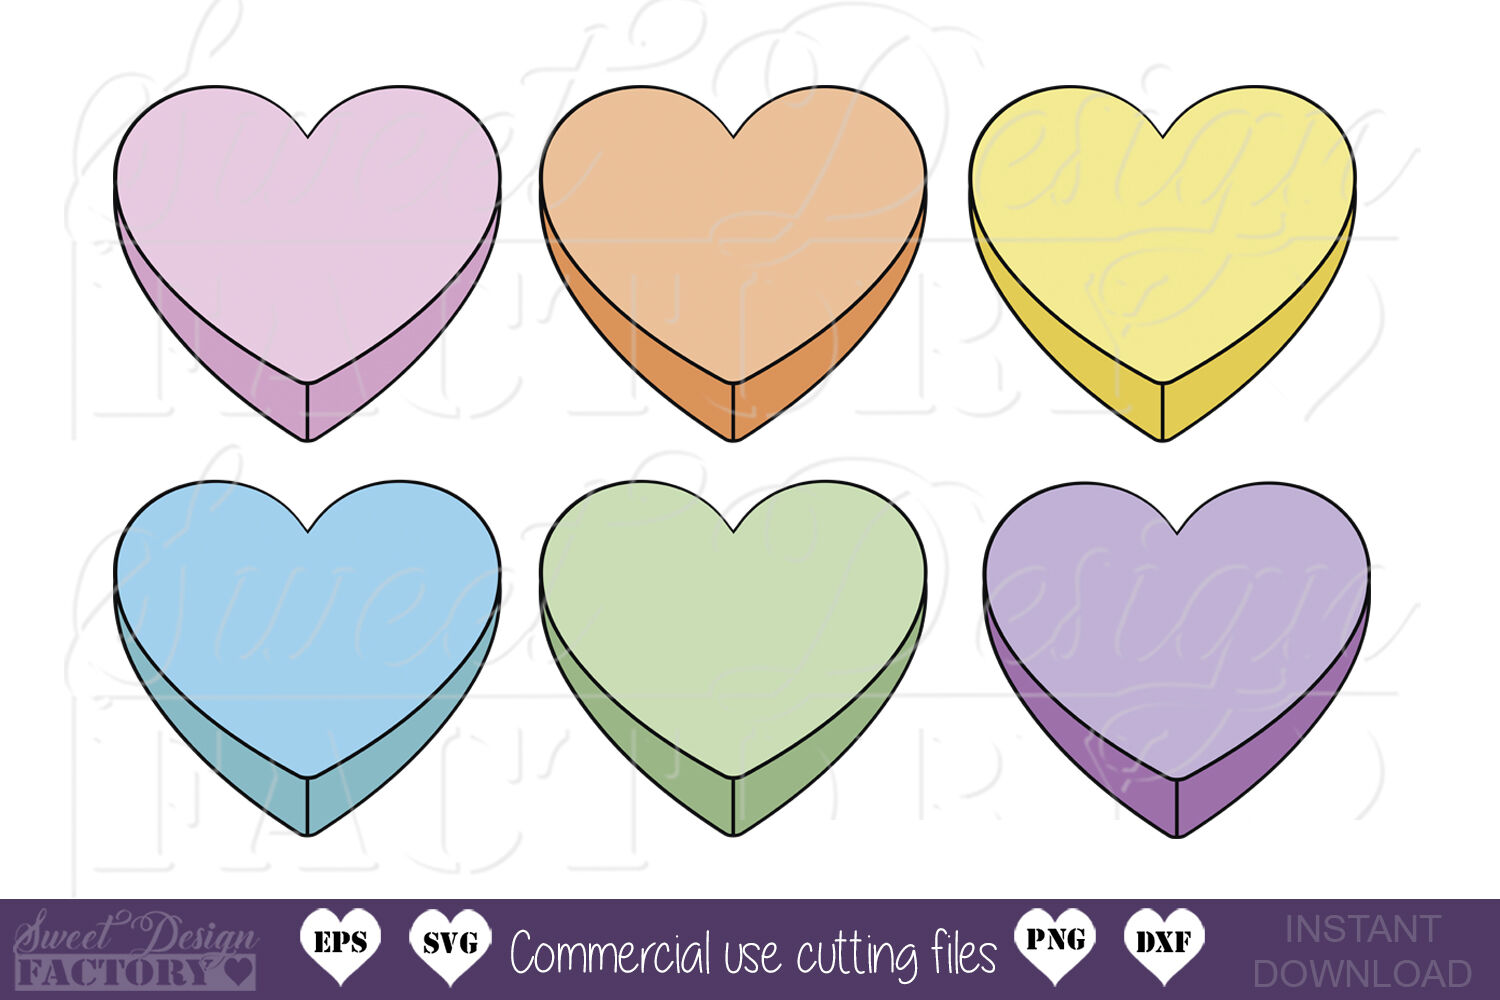 Candy Hearts SVG Bundle By Sweetdesignfactory TheHungryJPEG